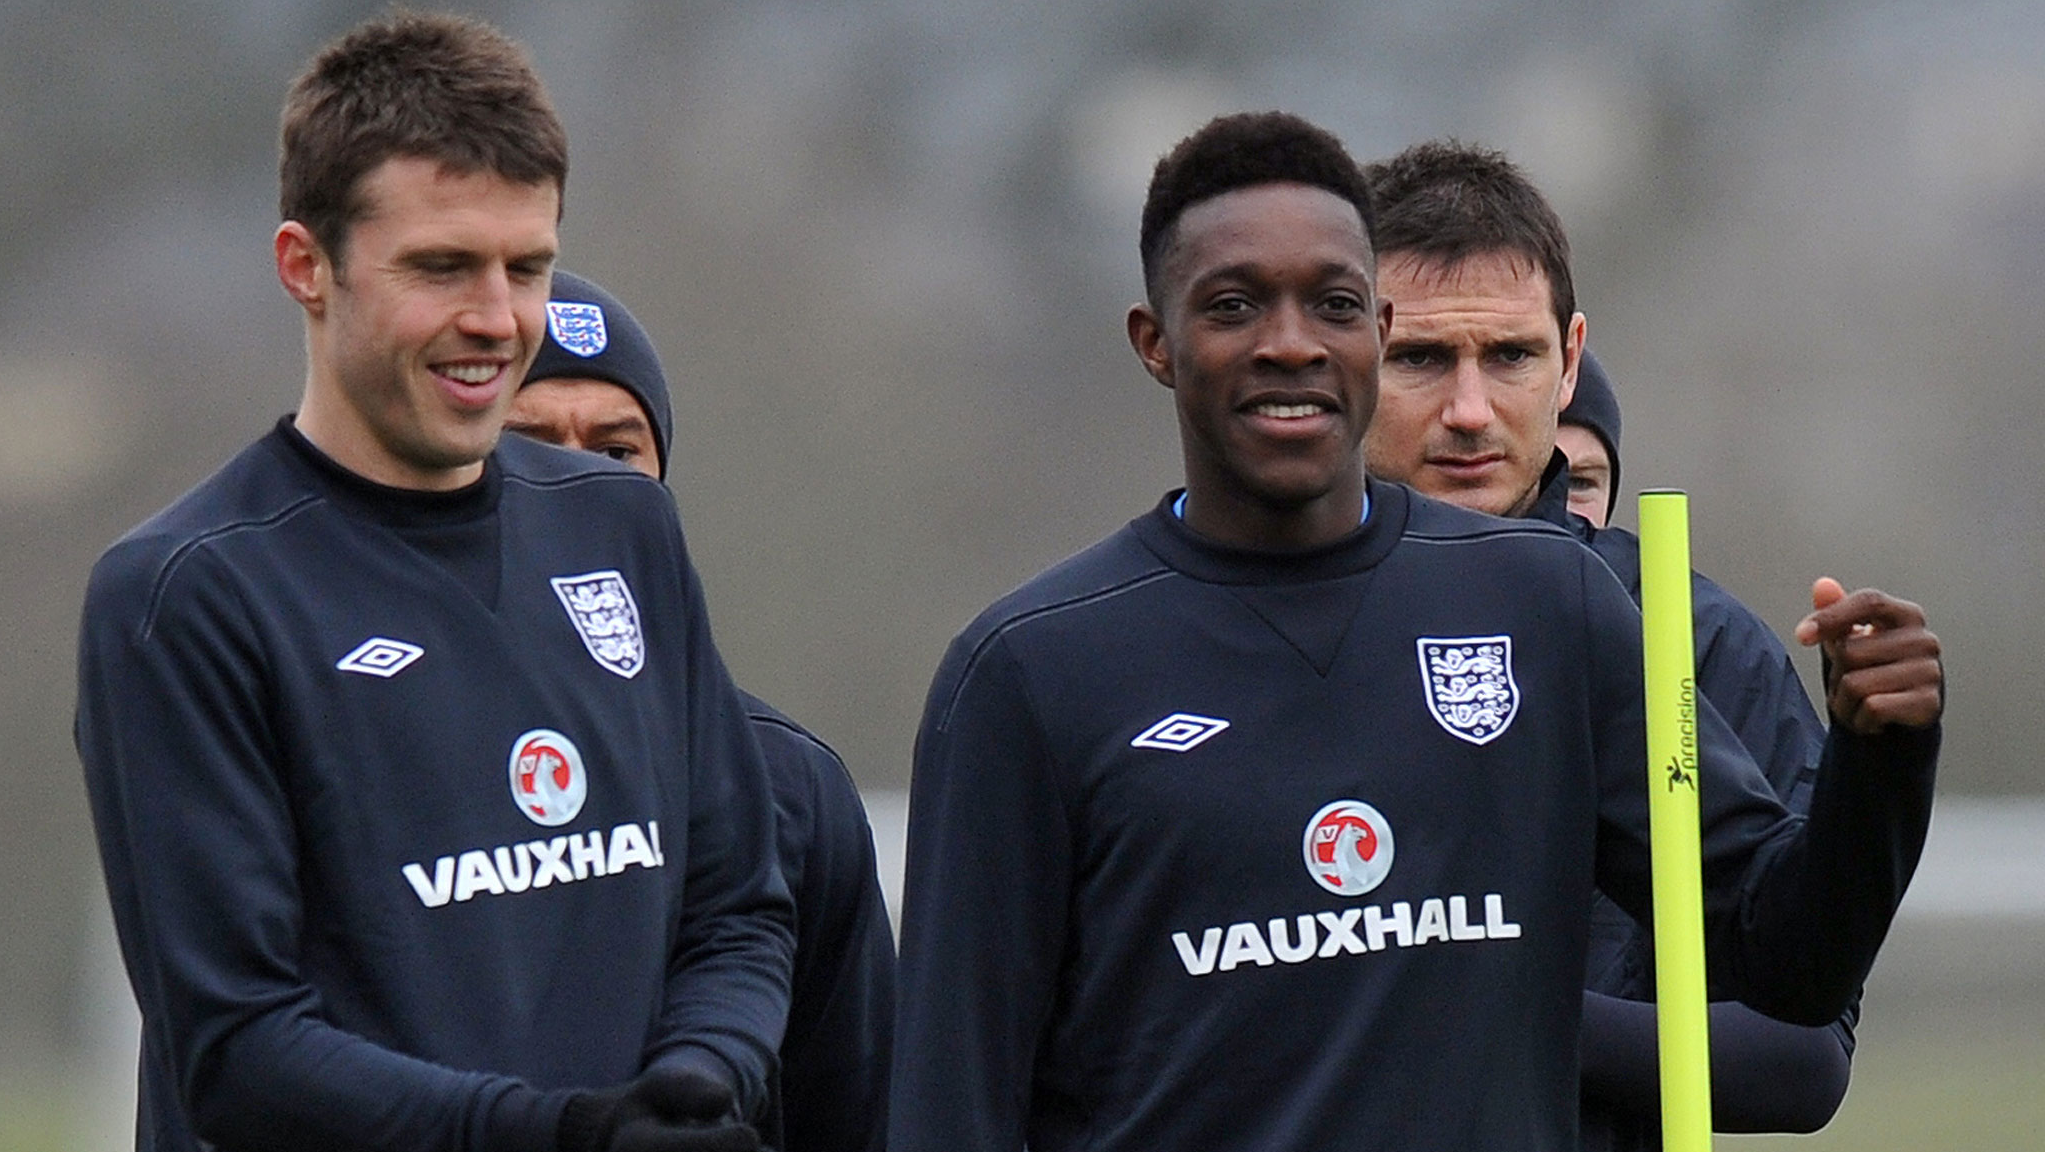 Michael Carrick and Danny Welbeck have withdrawn from the England squad to face Chile and Germany through injury